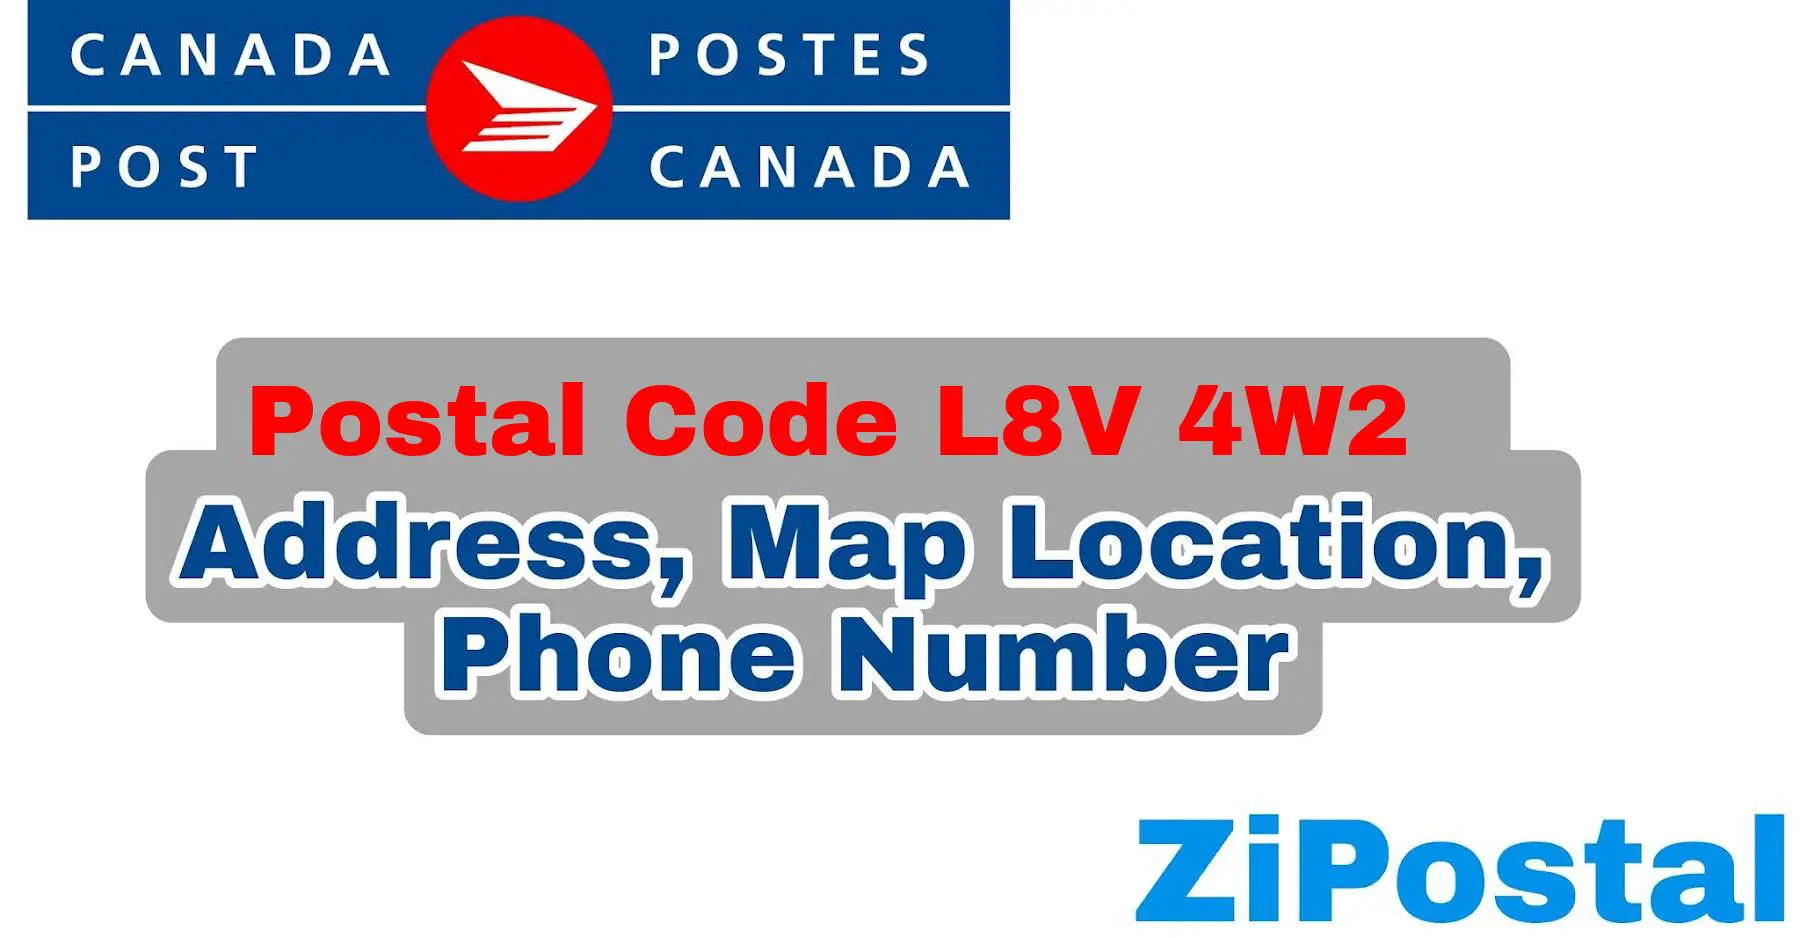 Postal Code L8V 4W2 Address Map Location and Phone Number